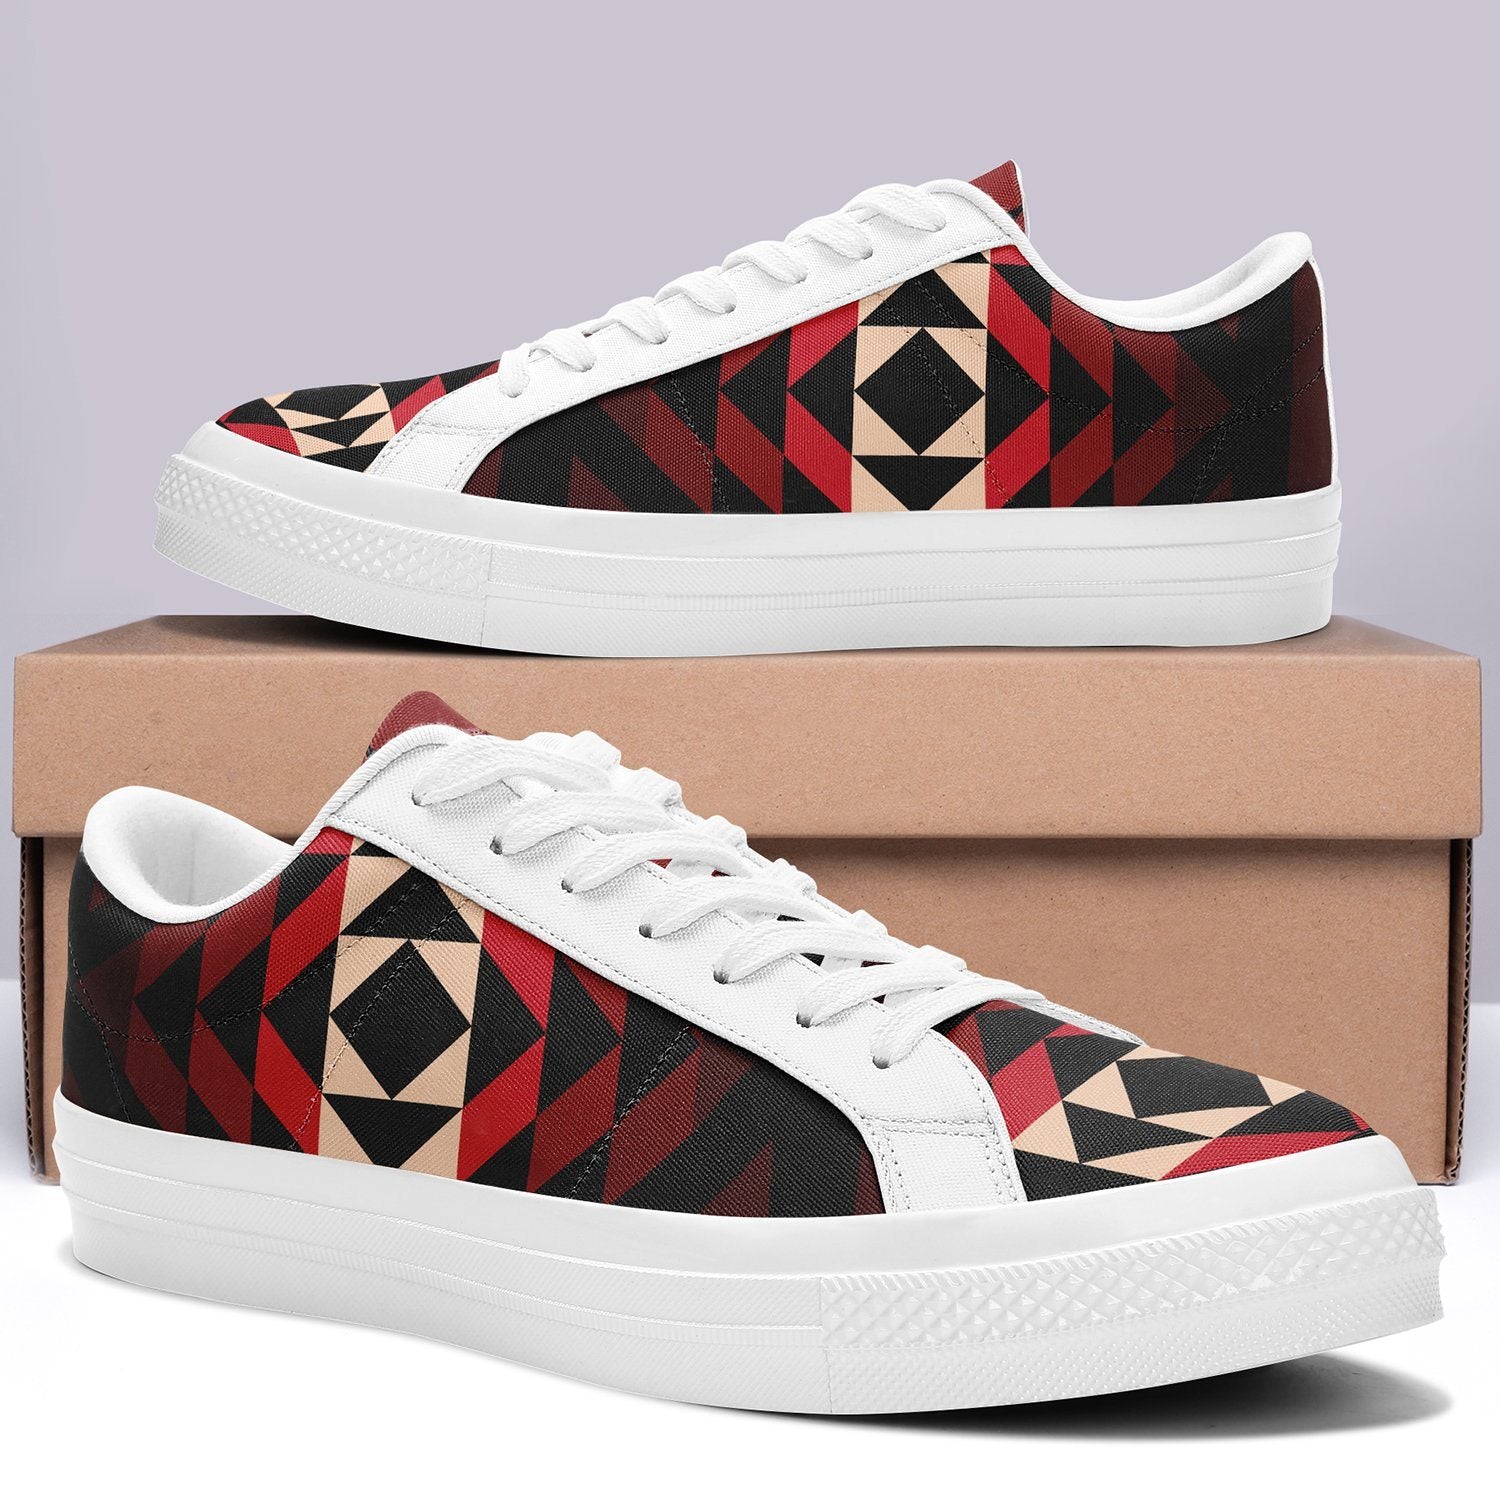 Black Rose Aapisi Low Top Canvas Shoes White Sole aapisi Herman 